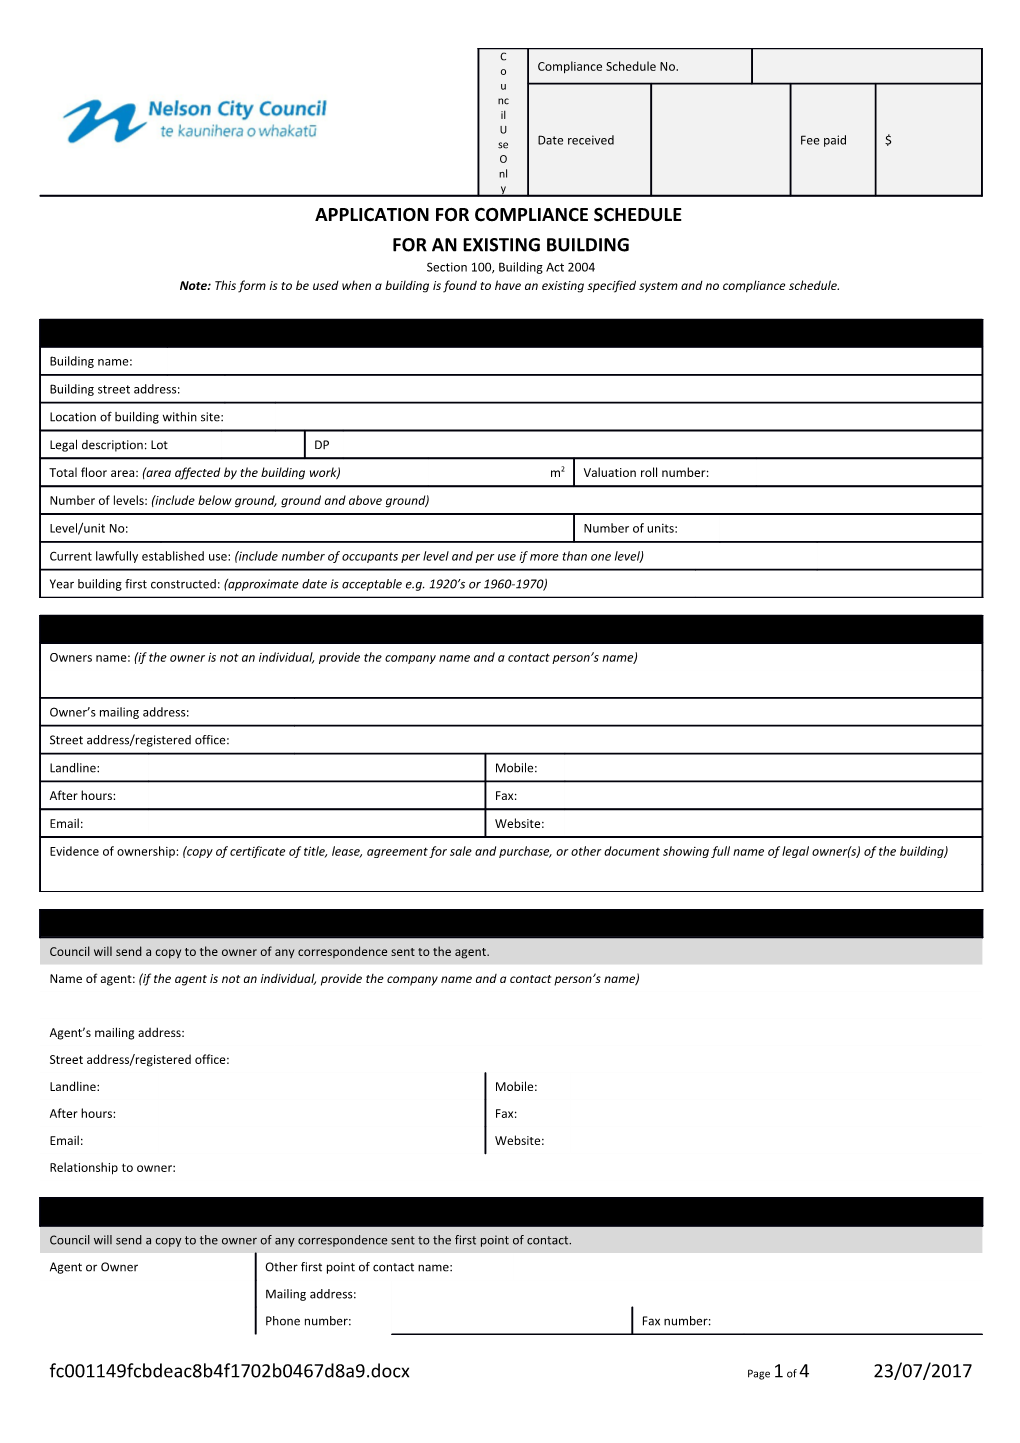 BAM 017 Application for Compliance Schedule for an Existing Building (A1801279)Page 1 Of